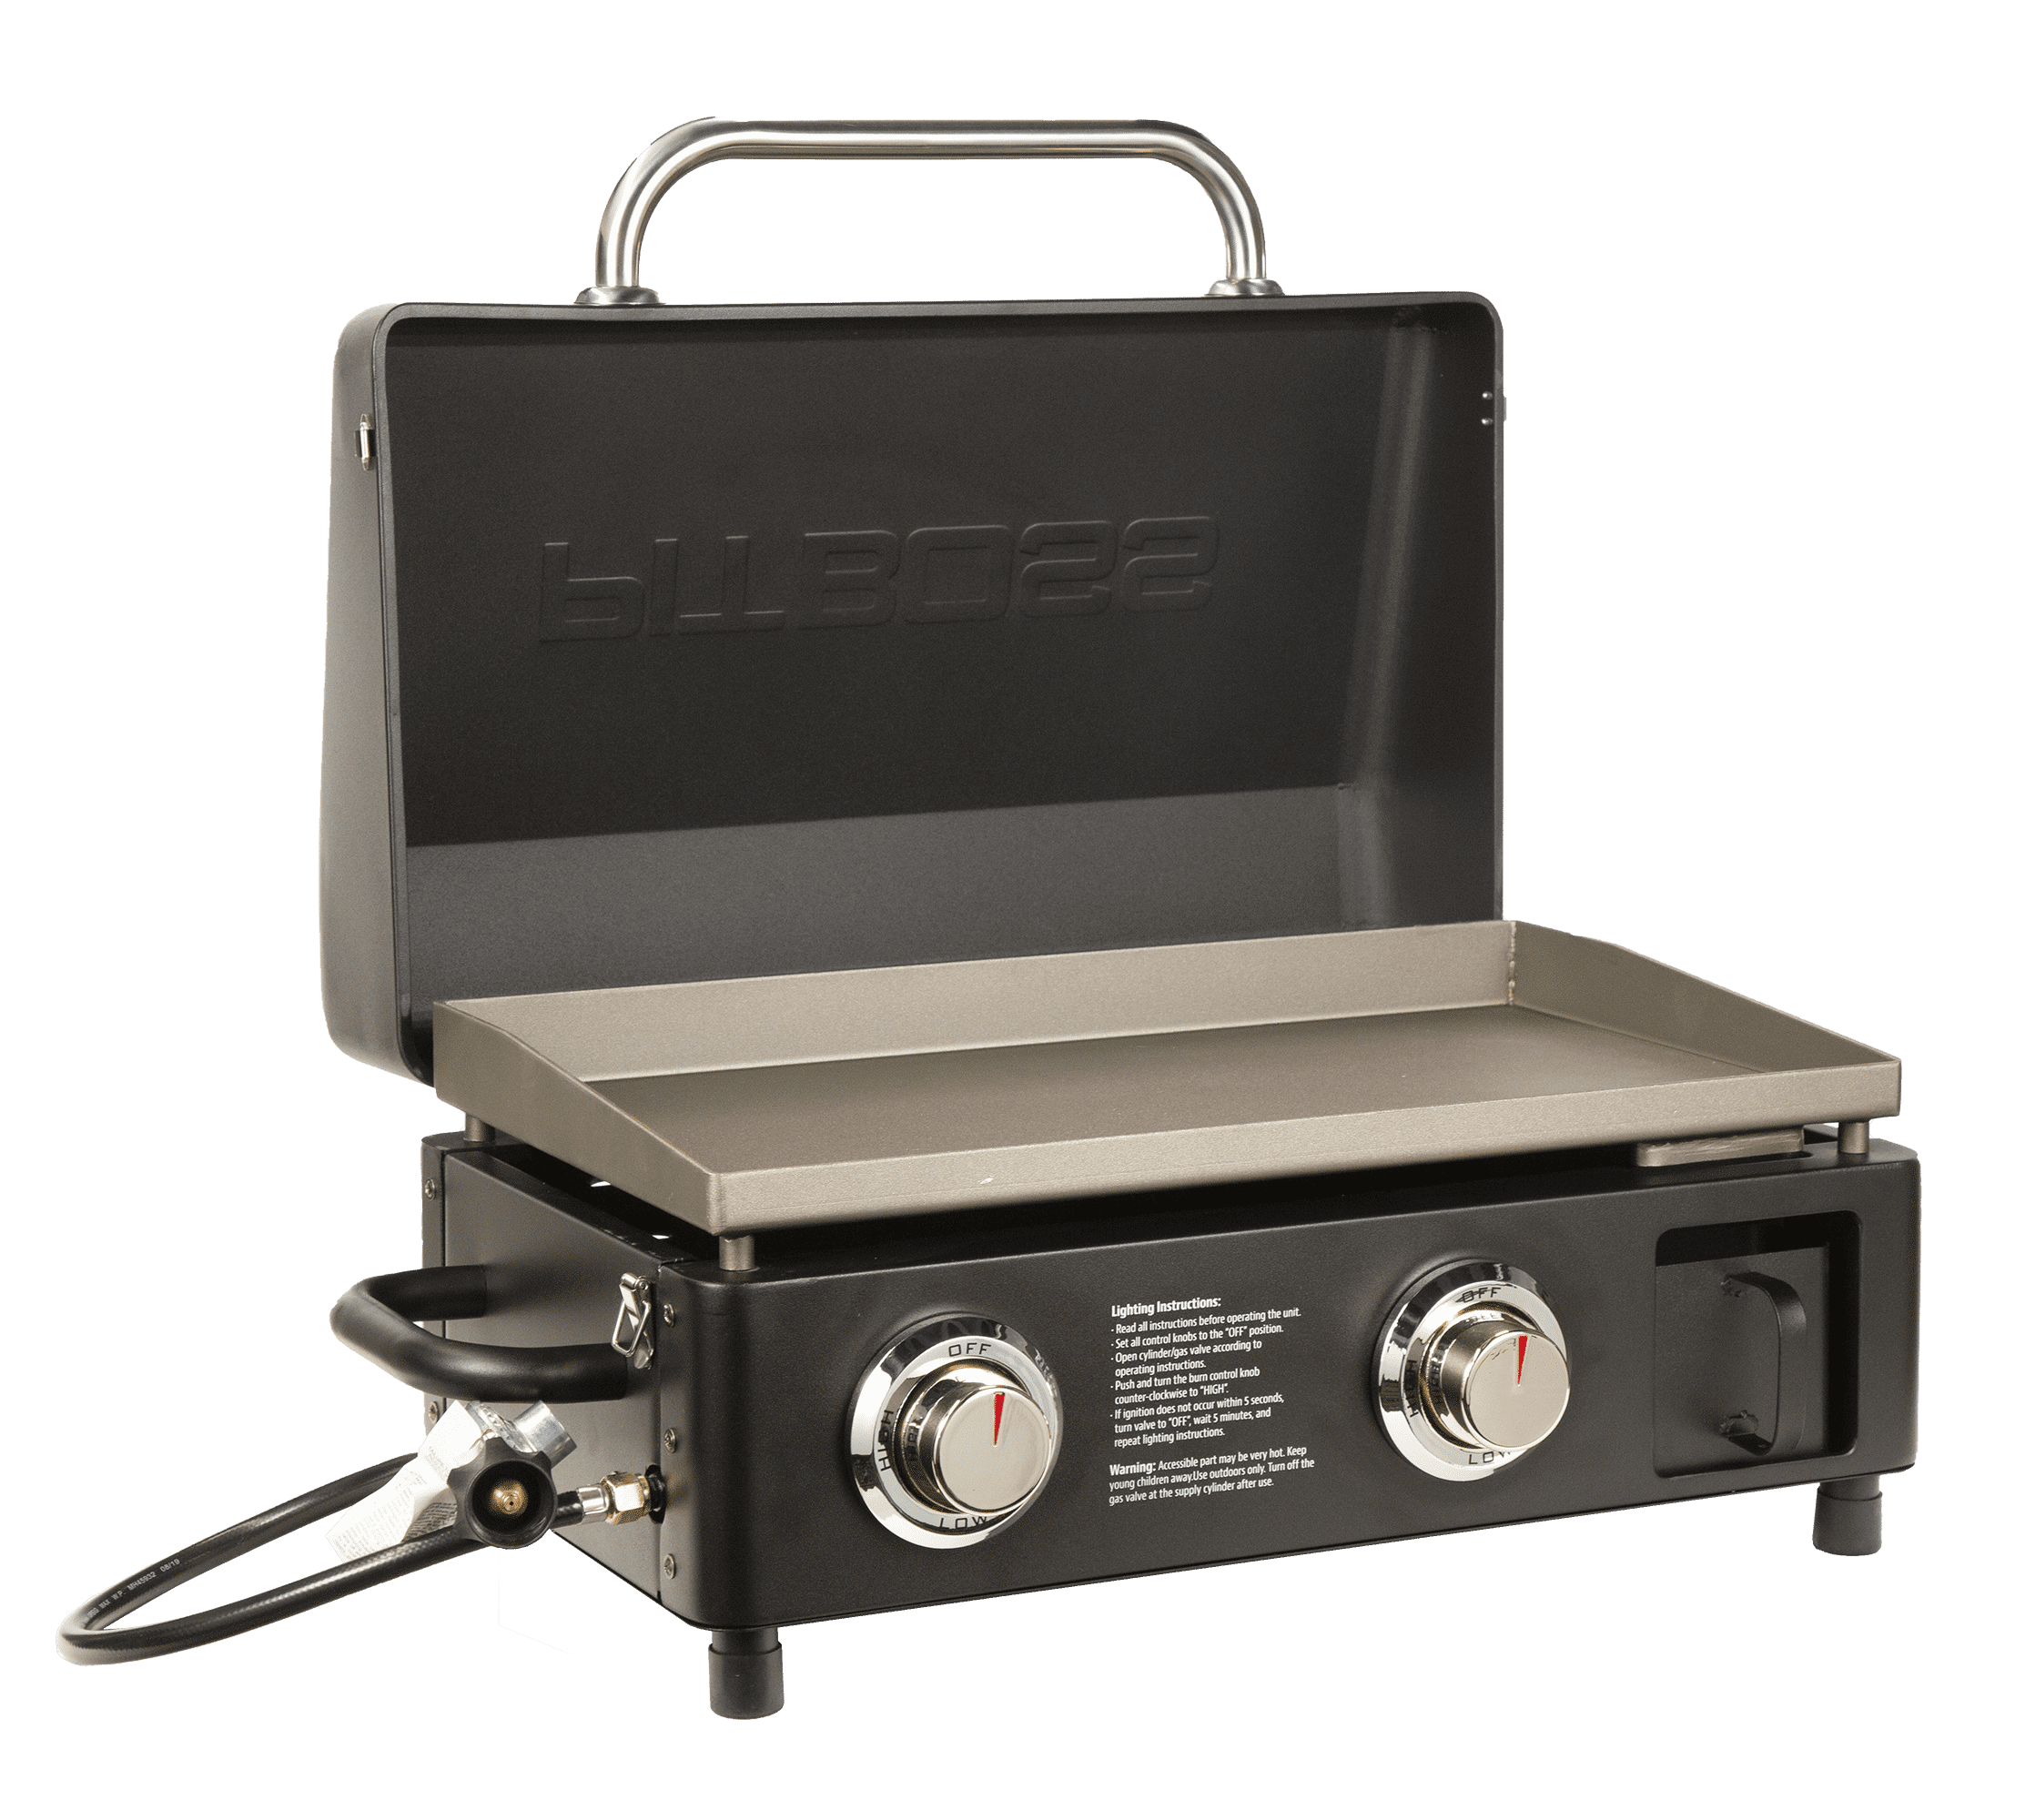 Pit Boss 10762 77 Inch Portable Gas Griddle with 753 sq. in. Cooking Area,  62,000 BTU, 5 Gas Burners, Built-In Side Shelves, 2-Side Handles, Push And  Turn Ignition, and Pre Seasoned Griddle Top